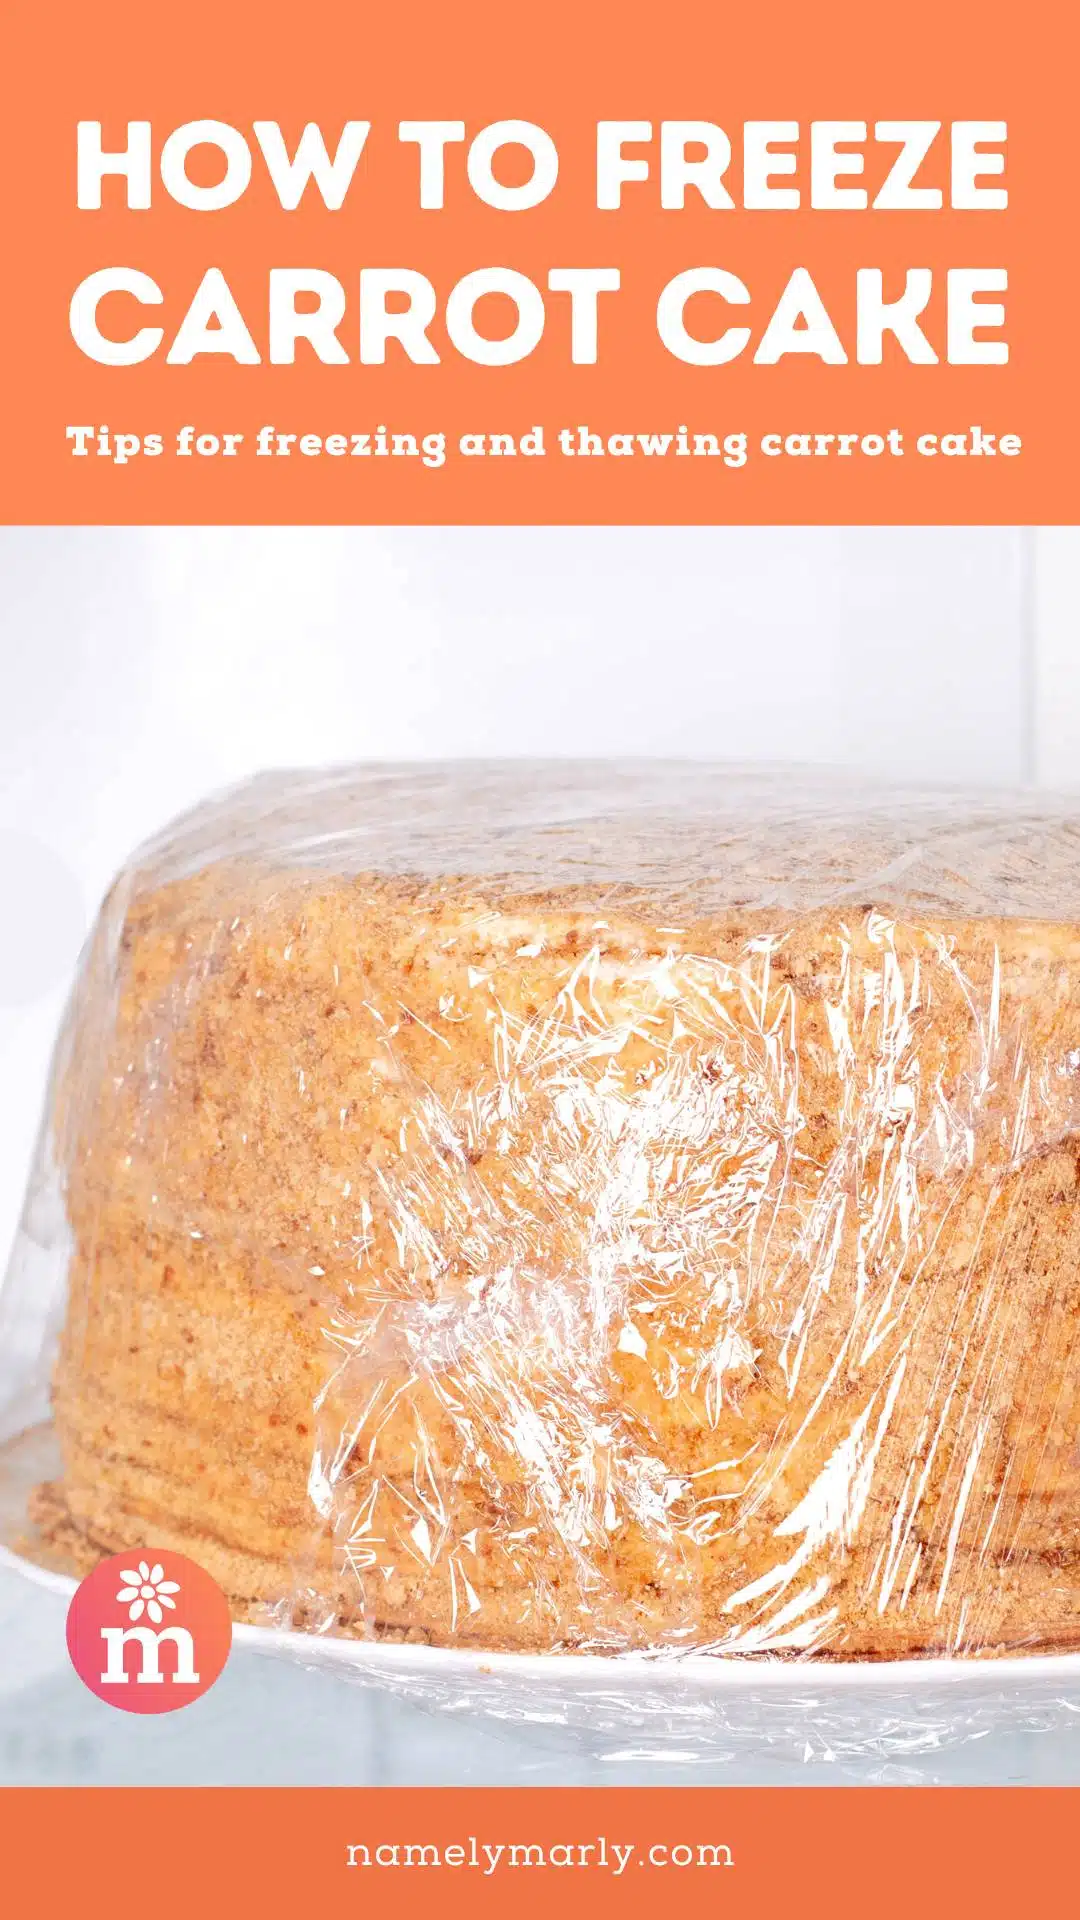 Round cakes are wrapped in plastic and stored in a freezer.  Above it is written, How to freeze carrot cake.  Tips for freezing and thawing carrot cake.